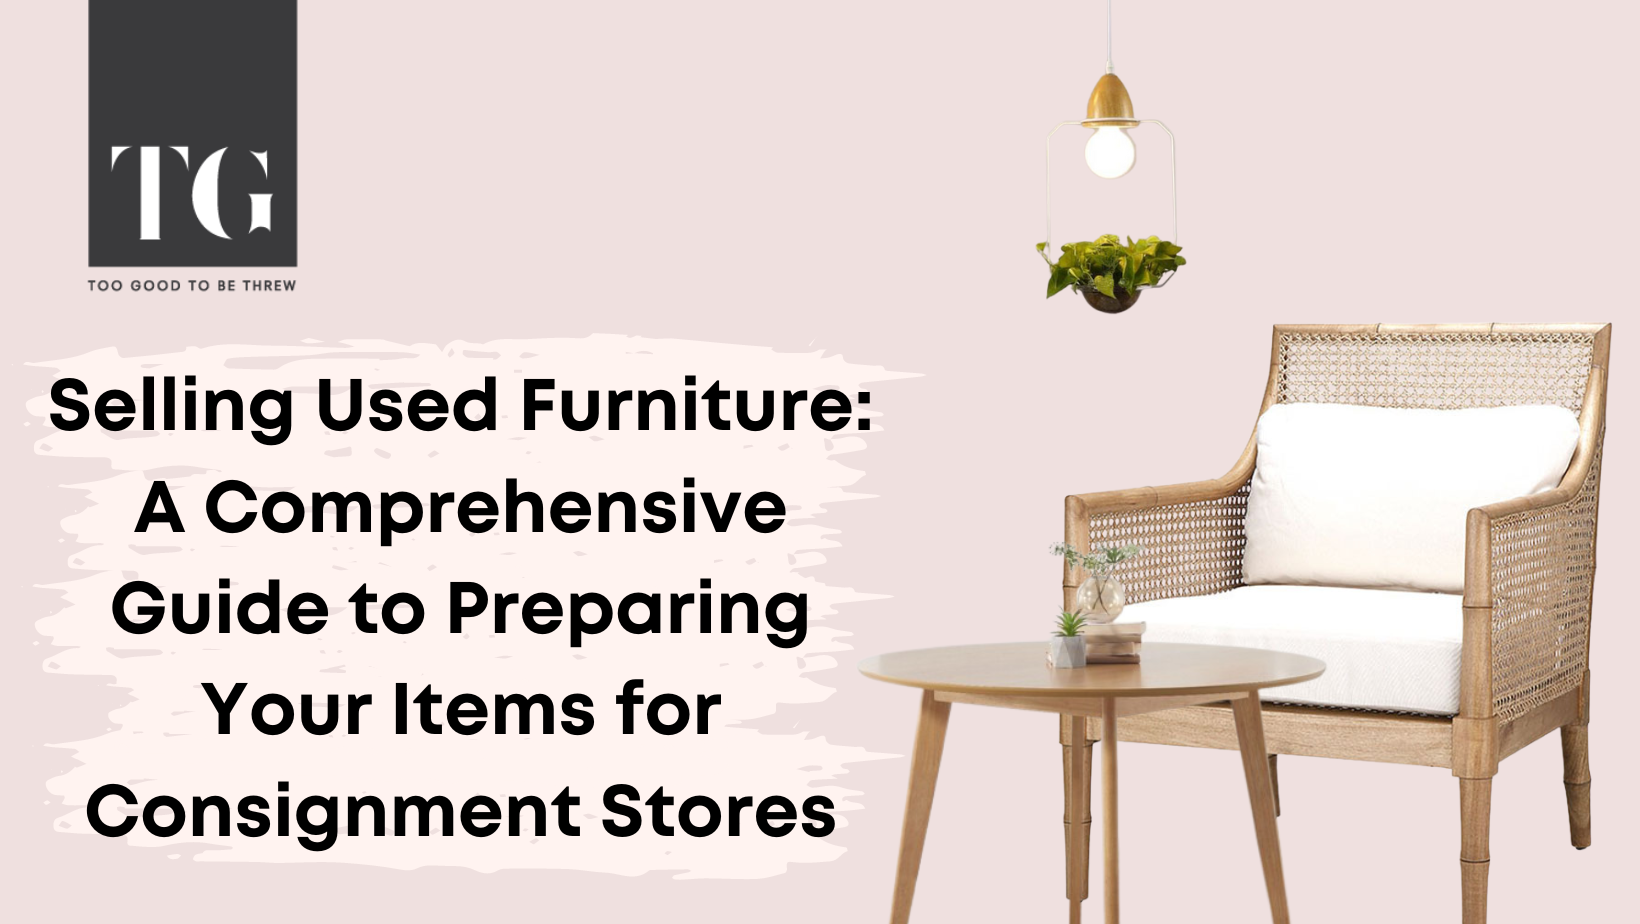 Selling Used Furniture: A Comprehensive Guide to Preparing Your Items for Consignment Stores